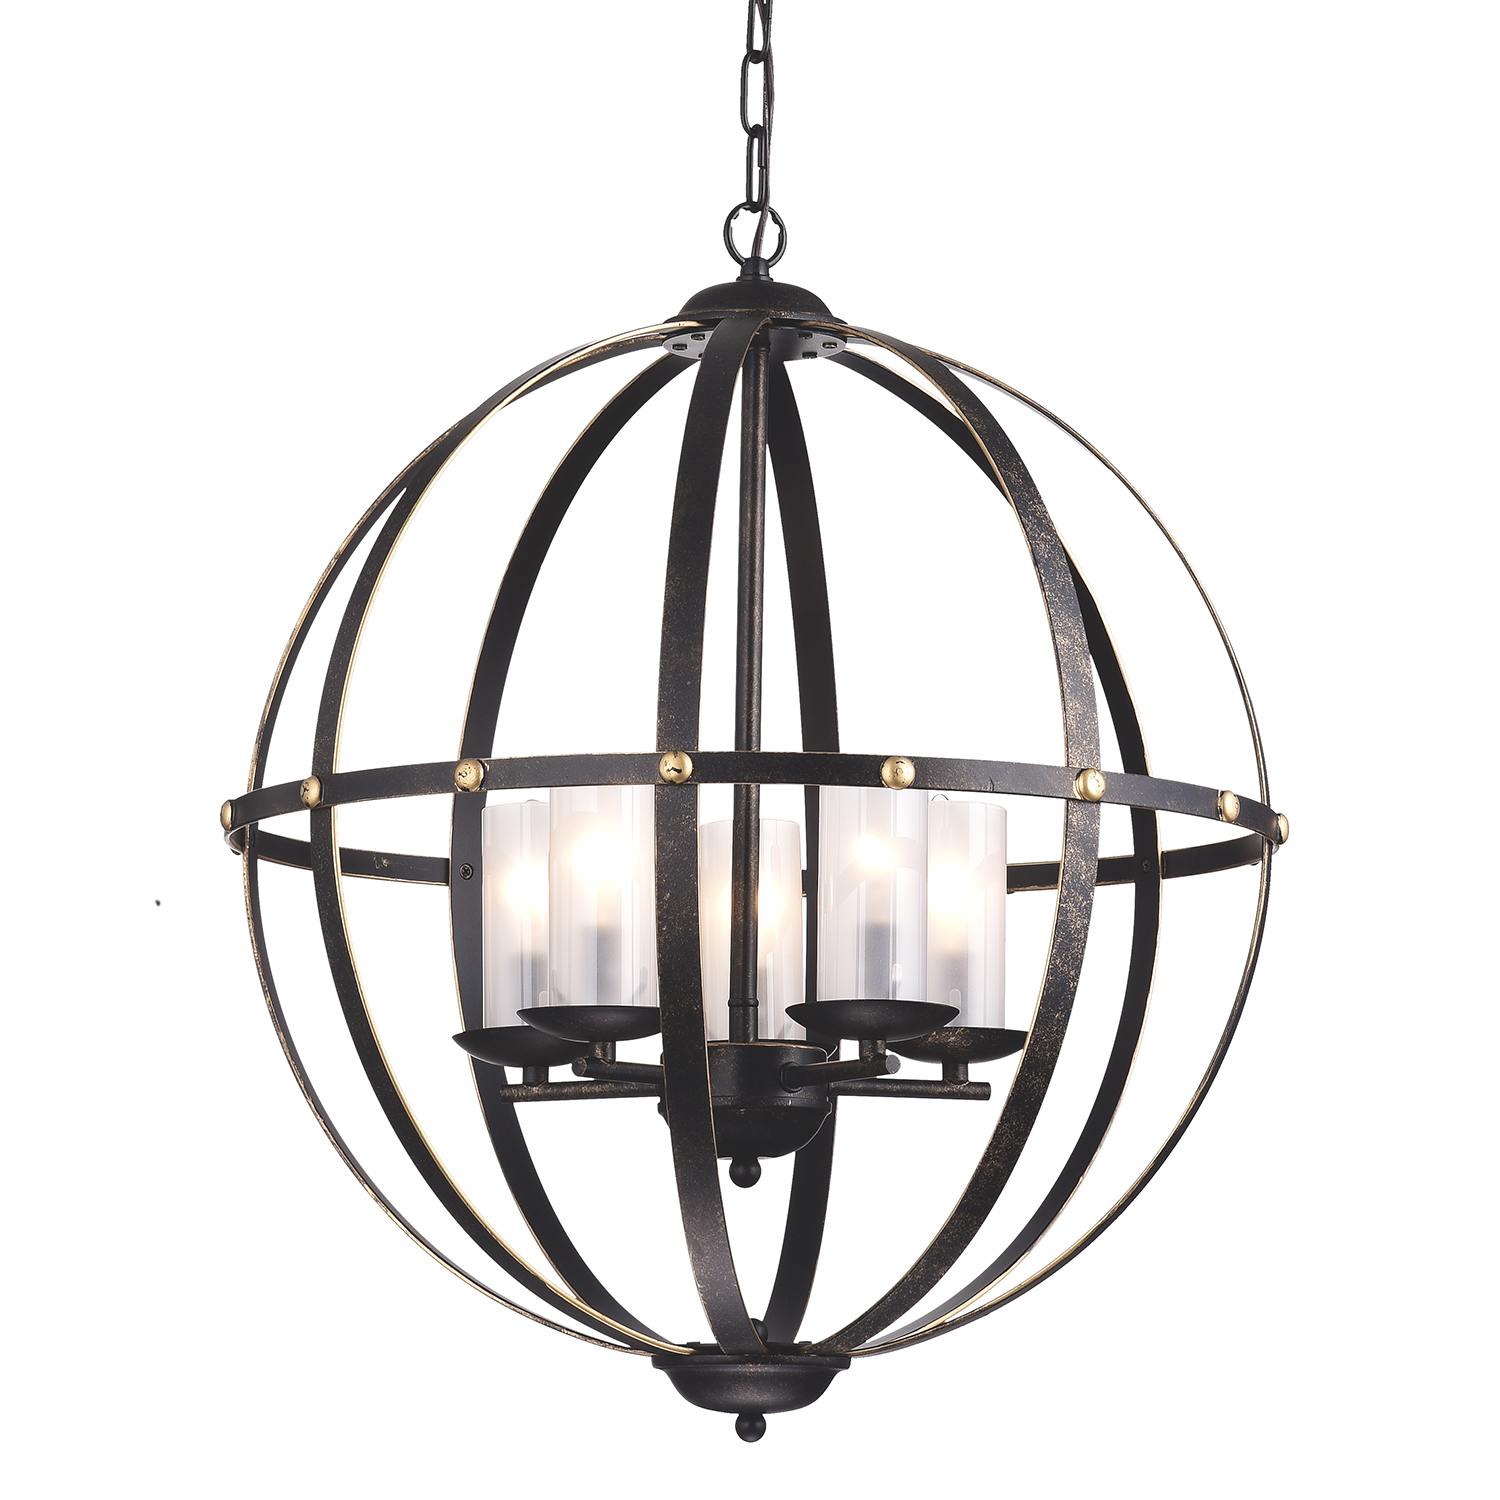 5-Light Antique Bronze Globe Sphere Orb Cage Chandelier with 